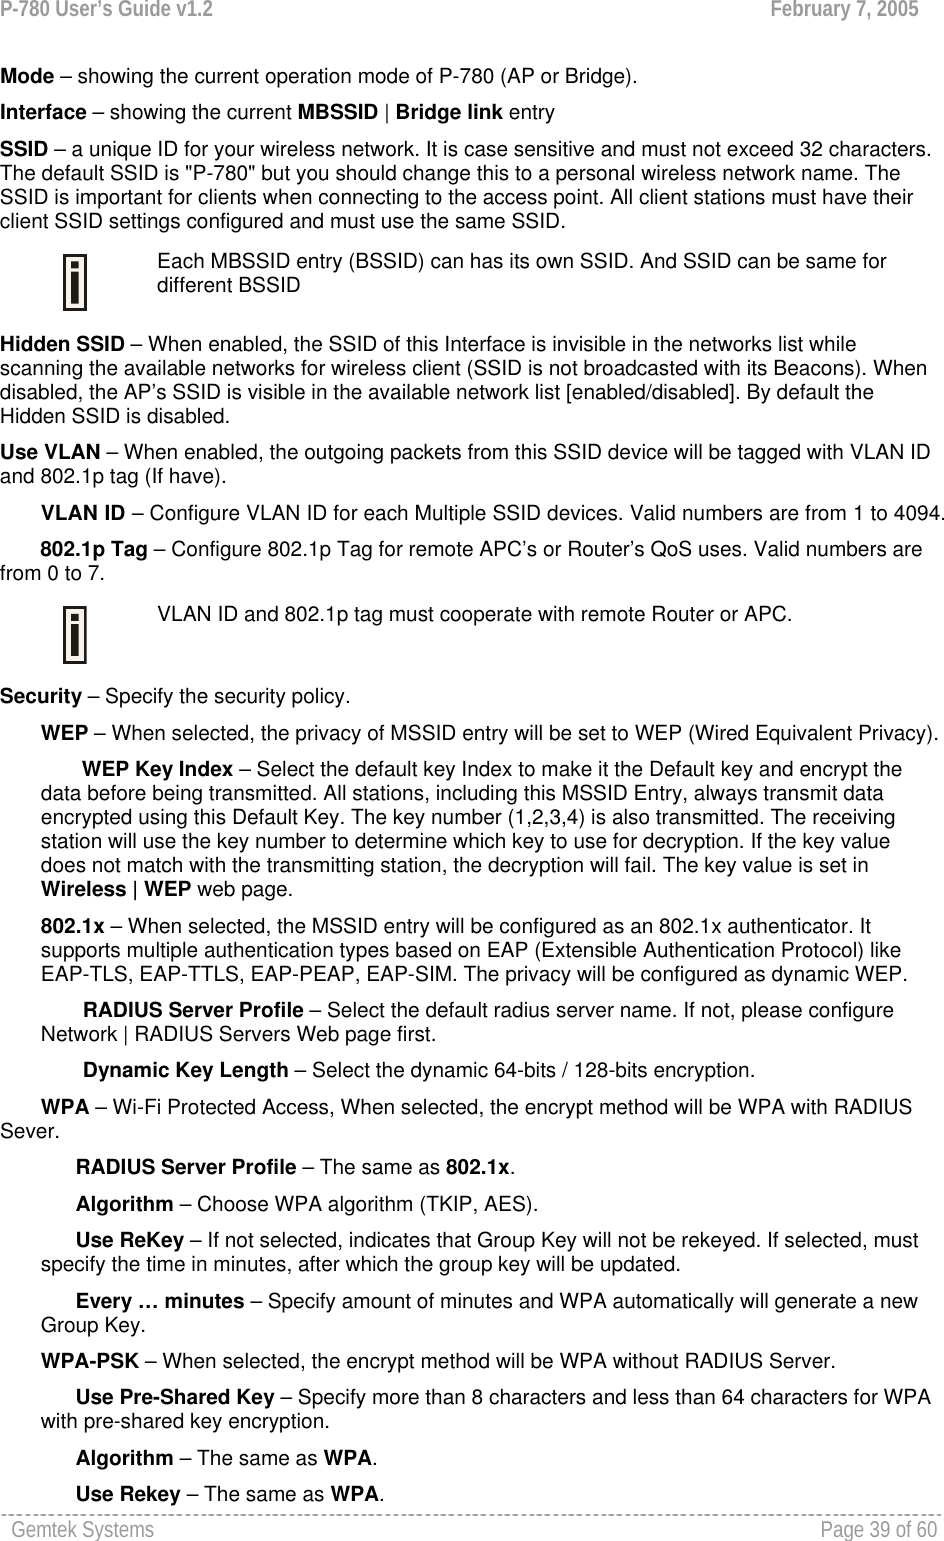 P-780 User’s Guide v1.2  February 7, 2005 Gemtek Systems    Page 39 of 60   Mode – showing the current operation mode of P-780 (AP or Bridge). Interface – showing the current MBSSID | Bridge link entry  SSID – a unique ID for your wireless network. It is case sensitive and must not exceed 32 characters. The default SSID is &quot;P-780&quot; but you should change this to a personal wireless network name. The SSID is important for clients when connecting to the access point. All client stations must have their client SSID settings configured and must use the same SSID.  Each MBSSID entry (BSSID) can has its own SSID. And SSID can be same for different BSSID Hidden SSID – When enabled, the SSID of this Interface is invisible in the networks list while scanning the available networks for wireless client (SSID is not broadcasted with its Beacons). When disabled, the AP’s SSID is visible in the available network list [enabled/disabled]. By default the Hidden SSID is disabled. Use VLAN – When enabled, the outgoing packets from this SSID device will be tagged with VLAN ID and 802.1p tag (If have). VLAN ID – Configure VLAN ID for each Multiple SSID devices. Valid numbers are from 1 to 4094.        802.1p Tag – Configure 802.1p Tag for remote APC’s or Router’s QoS uses. Valid numbers are from 0 to 7.   VLAN ID and 802.1p tag must cooperate with remote Router or APC.  Security – Specify the security policy. WEP – When selected, the privacy of MSSID entry will be set to WEP (Wired Equivalent Privacy). WEP Key Index – Select the default key Index to make it the Default key and encrypt the data before being transmitted. All stations, including this MSSID Entry, always transmit data encrypted using this Default Key. The key number (1,2,3,4) is also transmitted. The receiving station will use the key number to determine which key to use for decryption. If the key value does not match with the transmitting station, the decryption will fail. The key value is set in Wireless | WEP web page. 802.1x – When selected, the MSSID entry will be configured as an 802.1x authenticator. It supports multiple authentication types based on EAP (Extensible Authentication Protocol) like EAP-TLS, EAP-TTLS, EAP-PEAP, EAP-SIM. The privacy will be configured as dynamic WEP. RADIUS Server Profile – Select the default radius server name. If not, please configure Network | RADIUS Servers Web page first. Dynamic Key Length – Select the dynamic 64-bits / 128-bits encryption. WPA – Wi-Fi Protected Access, When selected, the encrypt method will be WPA with RADIUS Sever.       RADIUS Server Profile – The same as 802.1x.       Algorithm – Choose WPA algorithm (TKIP, AES).       Use ReKey – If not selected, indicates that Group Key will not be rekeyed. If selected, must specify the time in minutes, after which the group key will be updated.       Every … minutes – Specify amount of minutes and WPA automatically will generate a new Group Key. WPA-PSK – When selected, the encrypt method will be WPA without RADIUS Server.       Use Pre-Shared Key – Specify more than 8 characters and less than 64 characters for WPA with pre-shared key encryption.       Algorithm – The same as WPA.       Use Rekey – The same as WPA. 